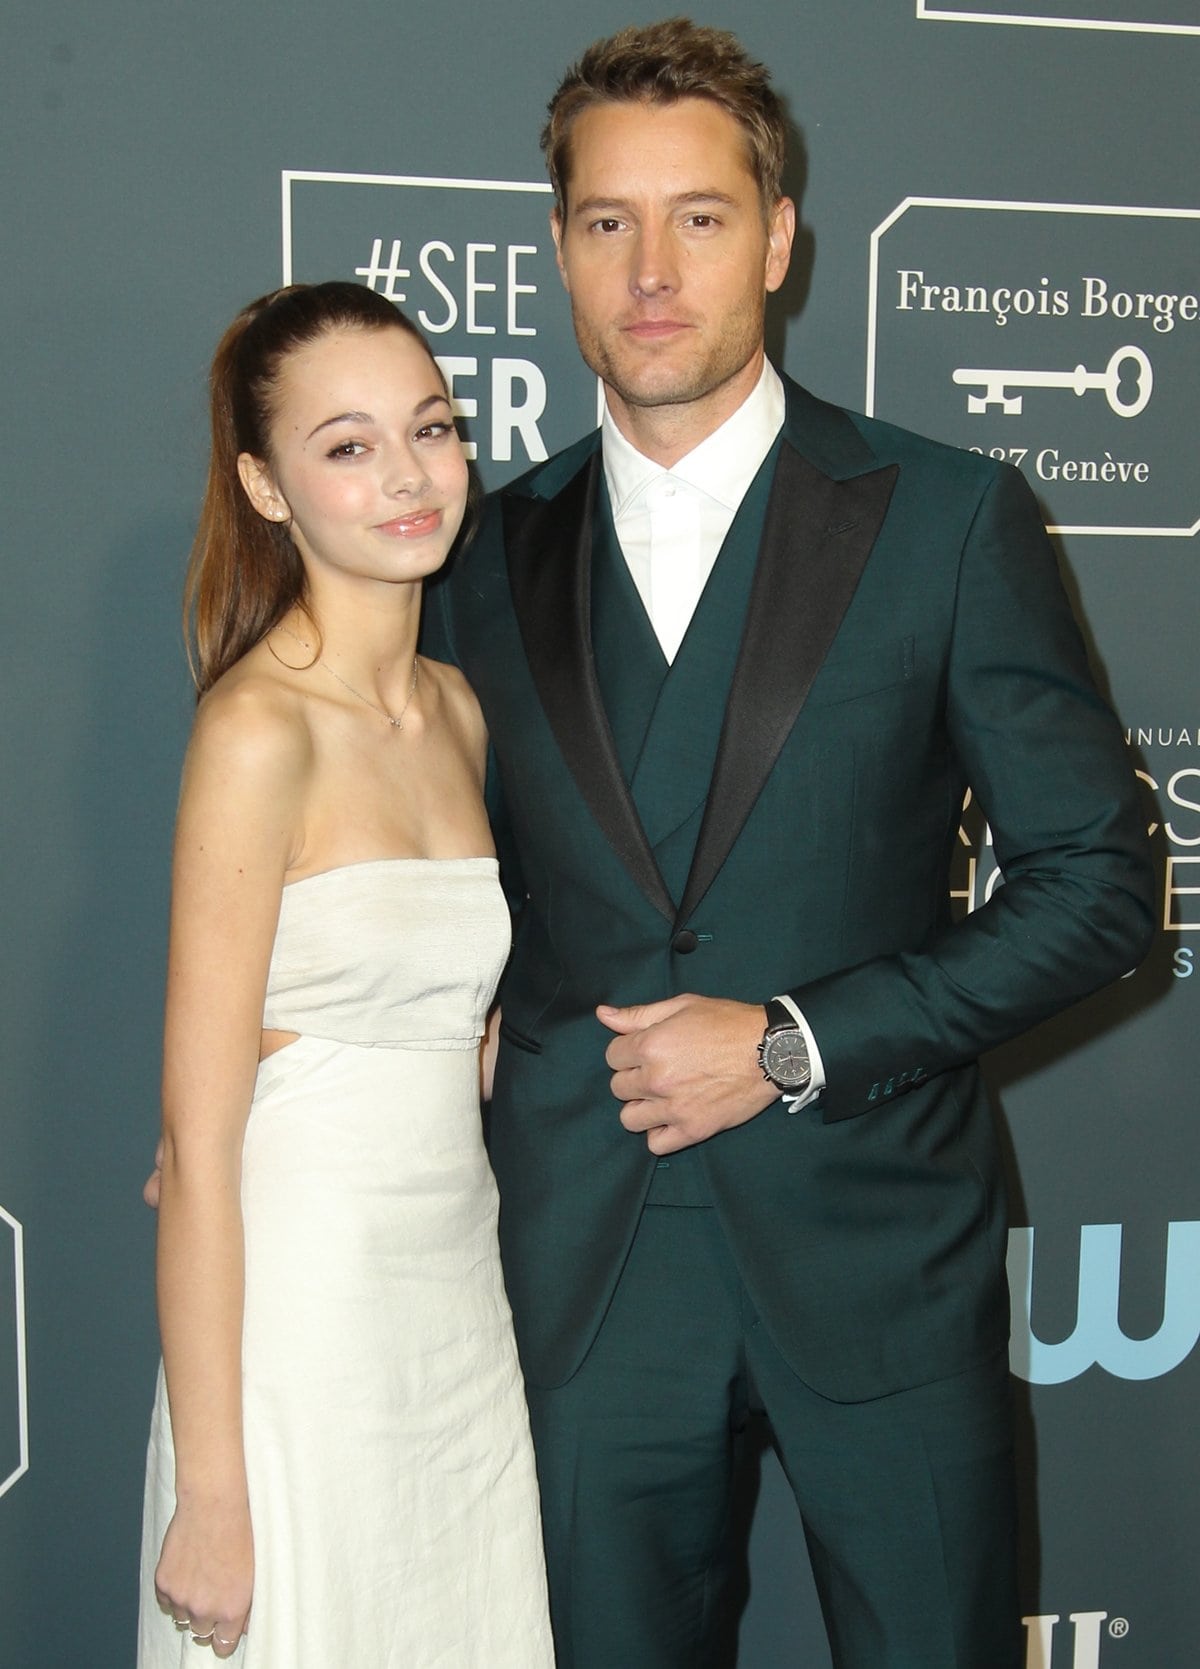 Born on July 3, 2004, Isabella Justice Hartley (L) is the daughter of Justin Hartley and his Passions co-star, Lindsay Korman